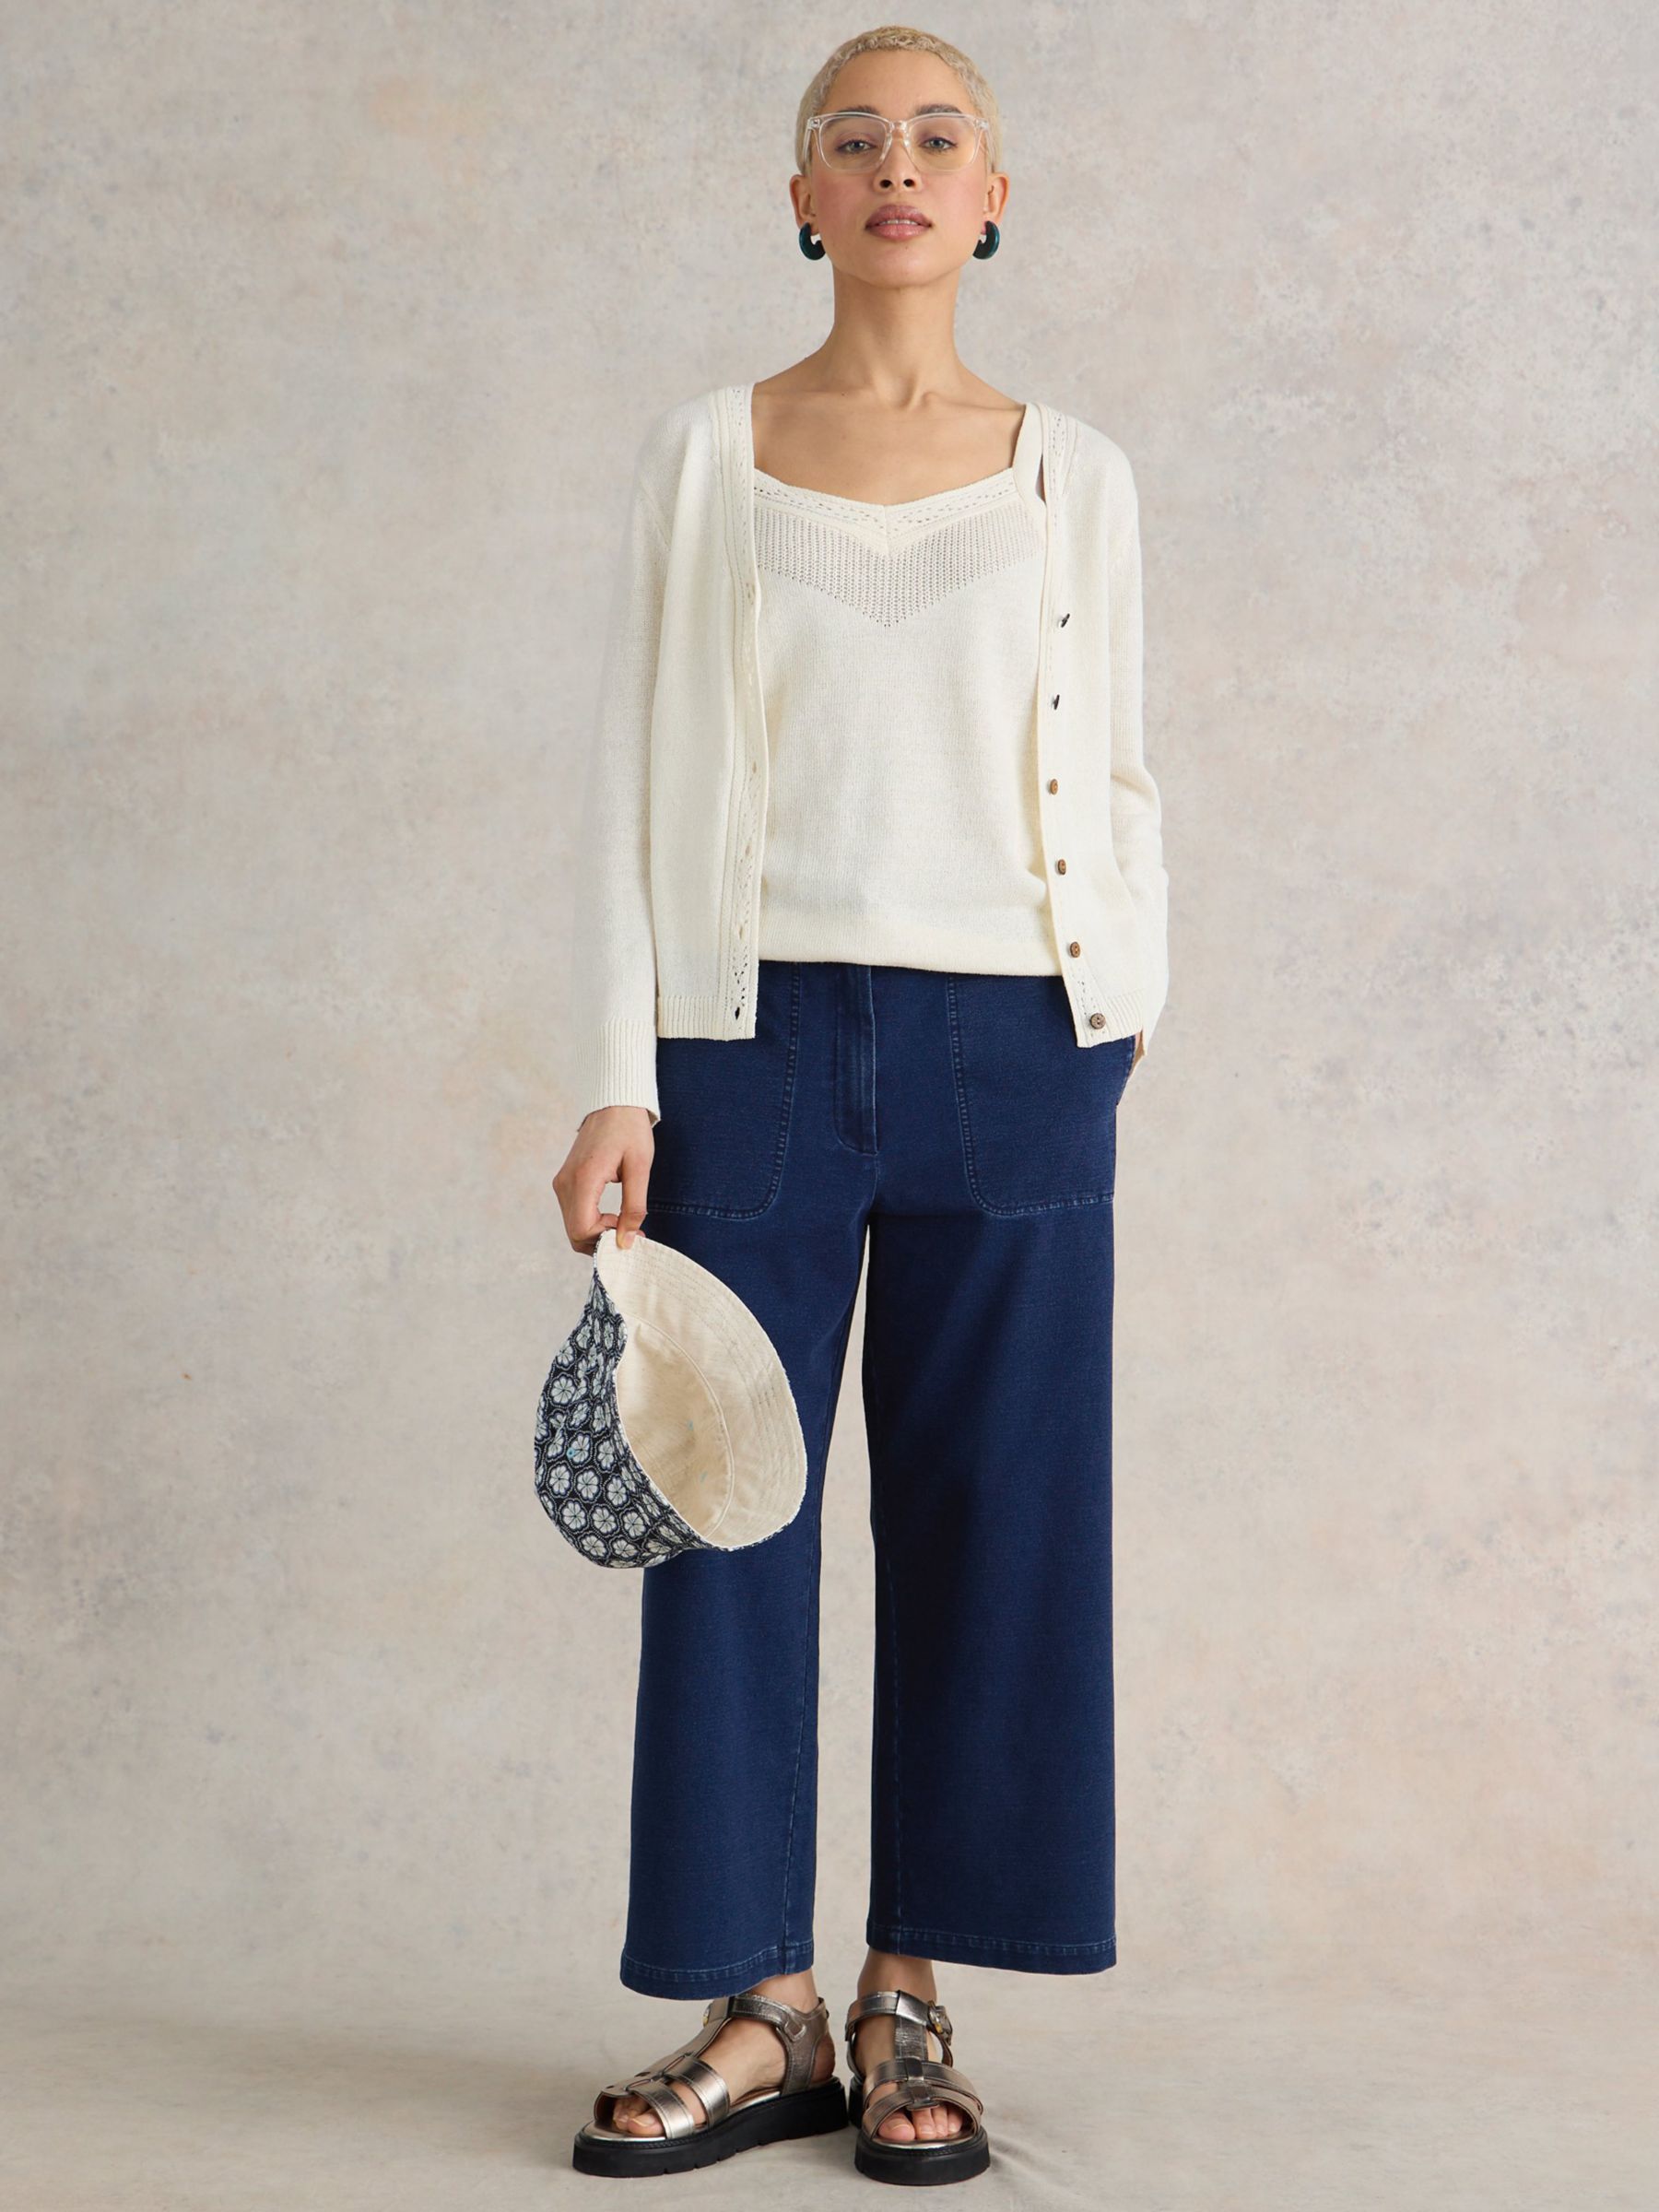 Cropped Wide Leg Pants- A Must This Spring And Summer